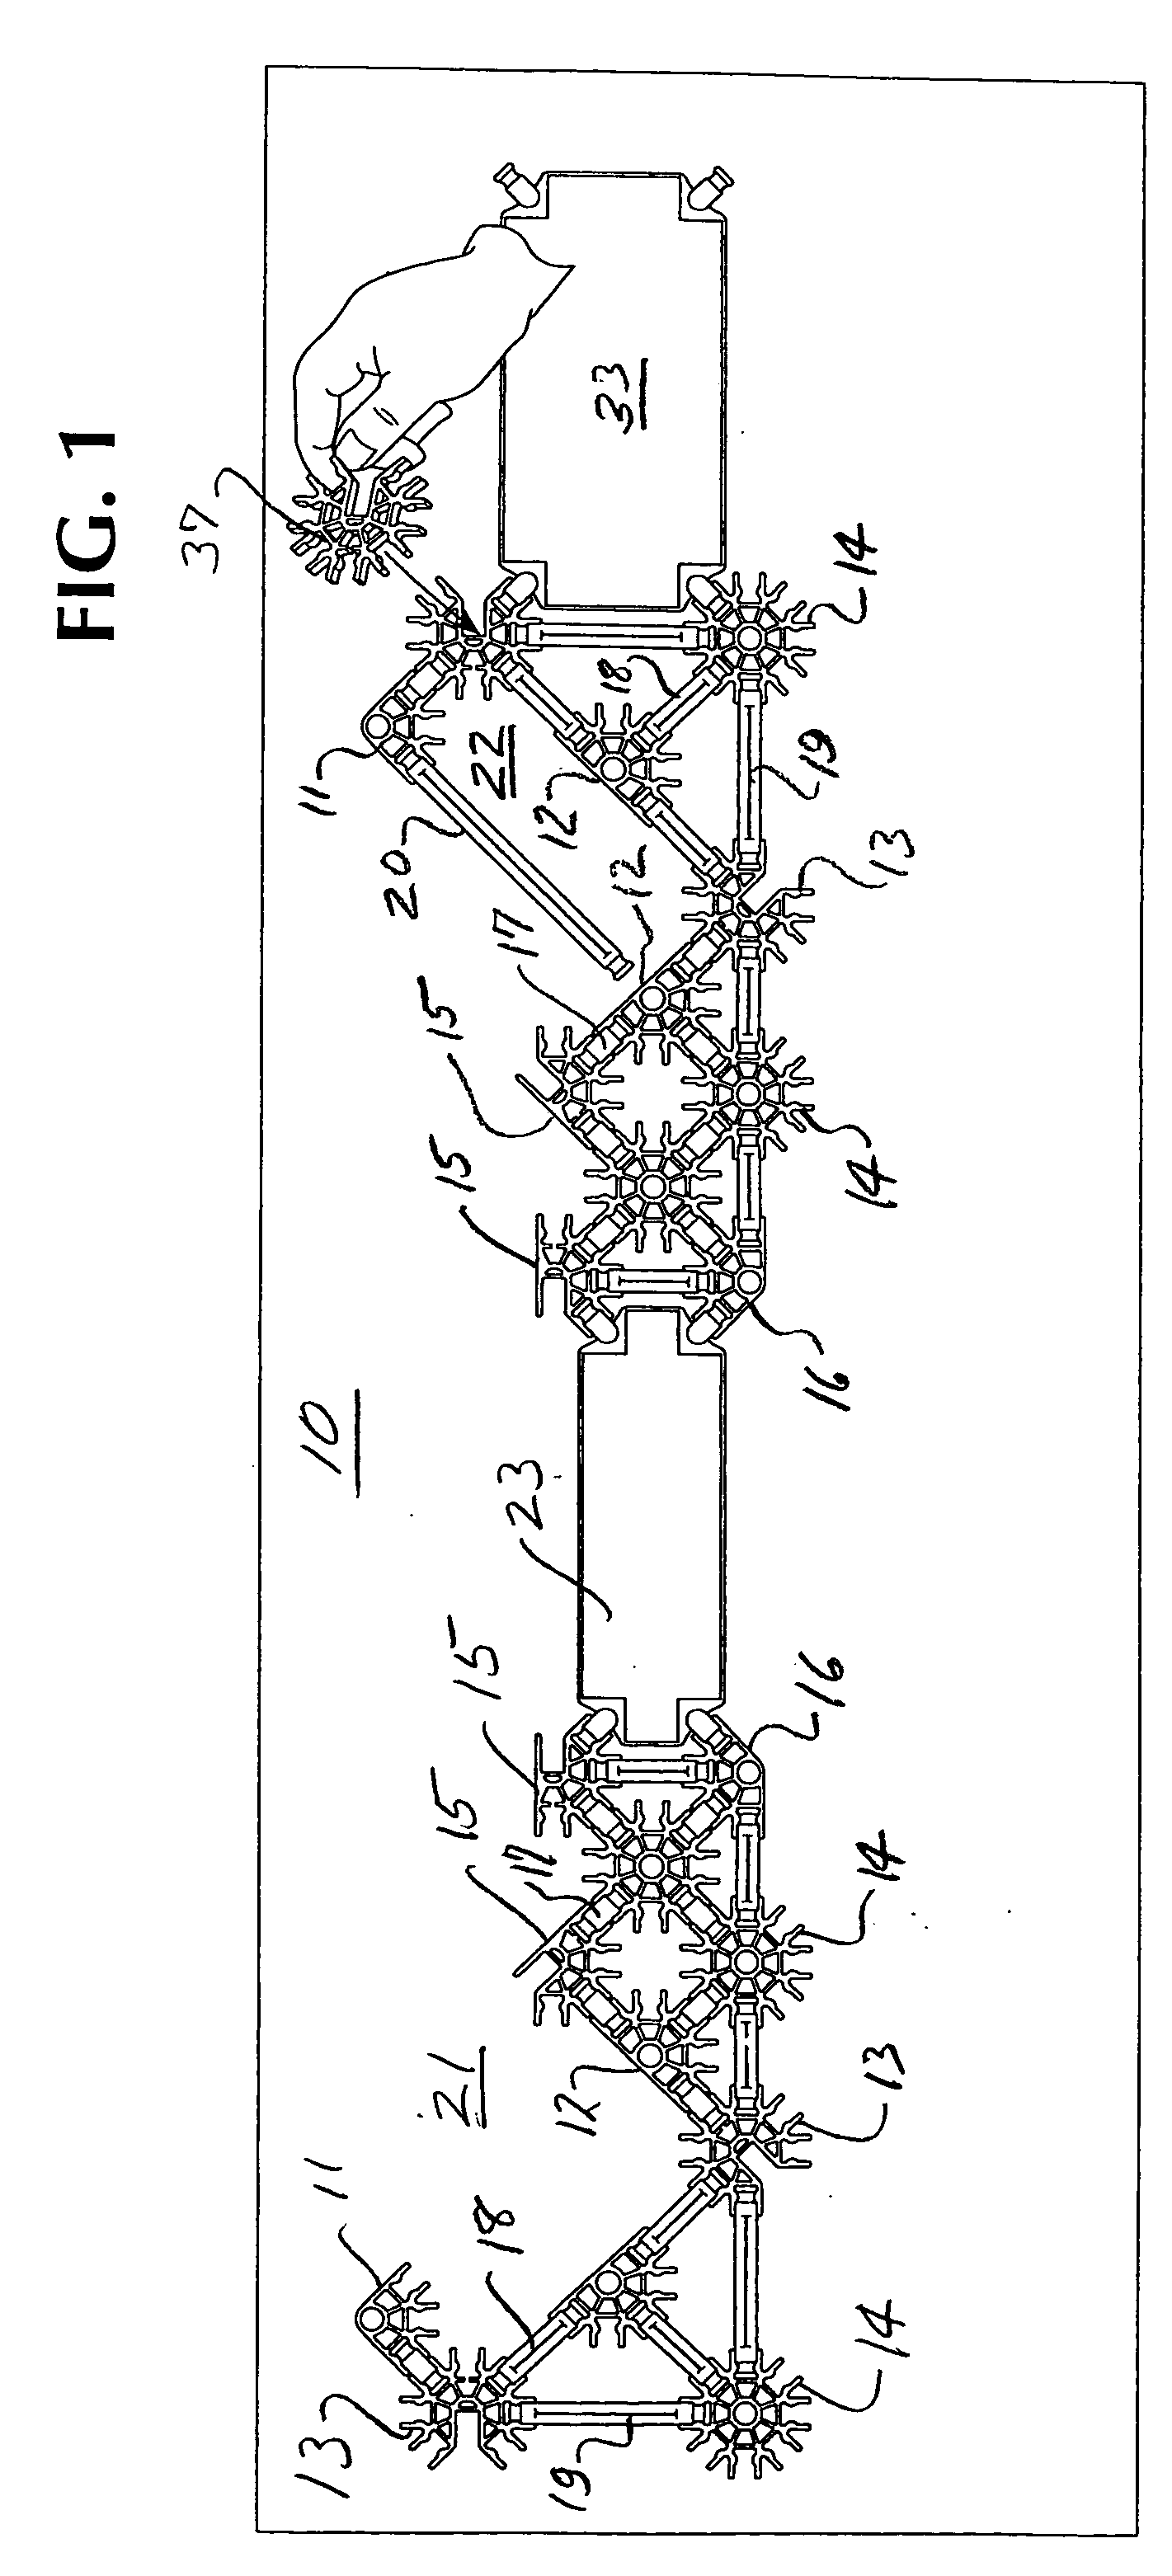 Method of constructing a three-dimensional structure with a multi-part construction toy set